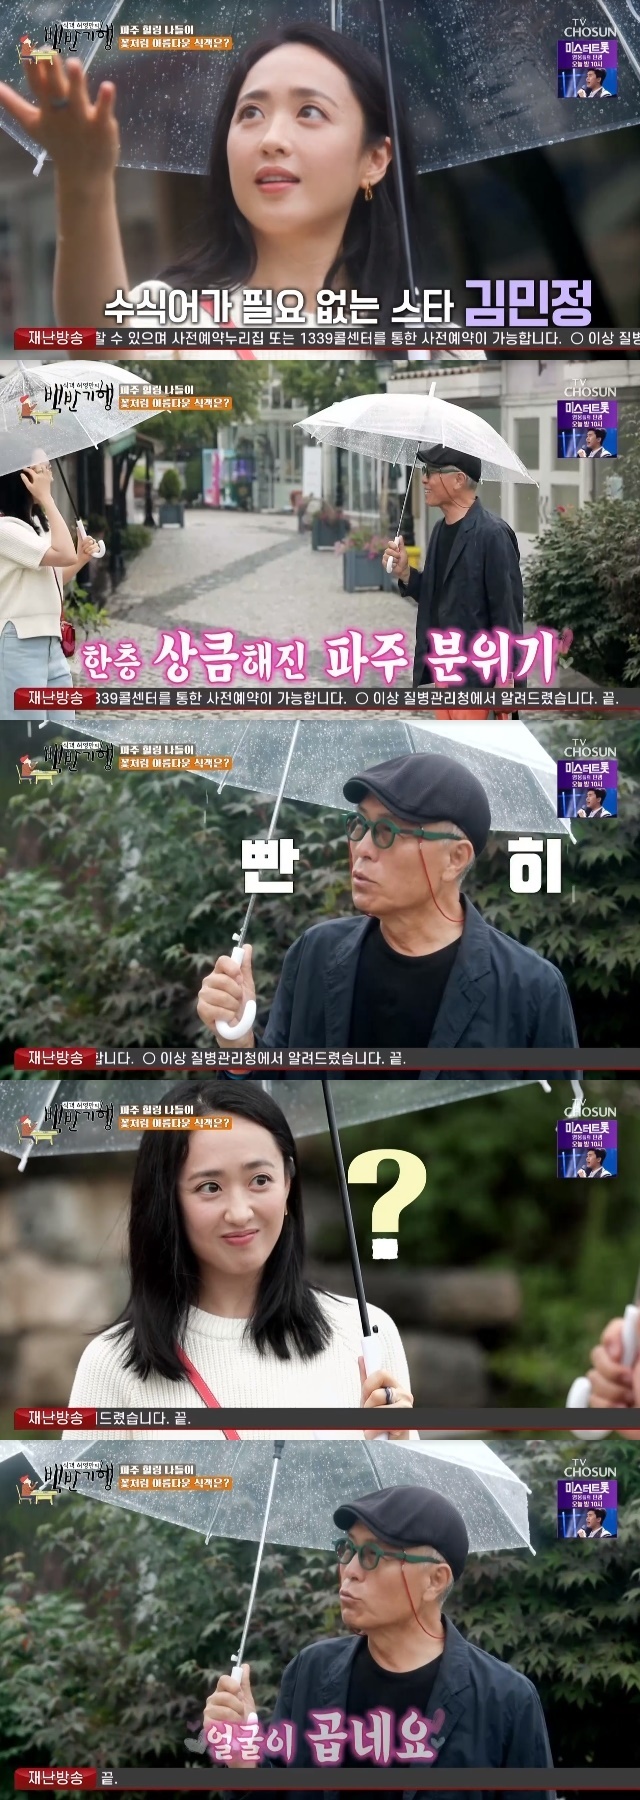 Huh Young-man praised Kim Min-jungs beautyIn the 163th episode of the TV Chosun Huh Young Mans Food Travel (hereinafter referred to as White Travel) broadcast on August 5, actor Kim Min-jung joined the Paju esophagus trip in Gyeonggi Province.On the day, Kim Min-jung first appeared, singing Huh Young-man, Teacher! Rainy weather, Kim Min-jung showed off her dazzling beauty through the umbrella.Huh Young-man, who first met Kim Min-jung, looked at his face and praised his appearance as the face is good and made the atmosphere warm.